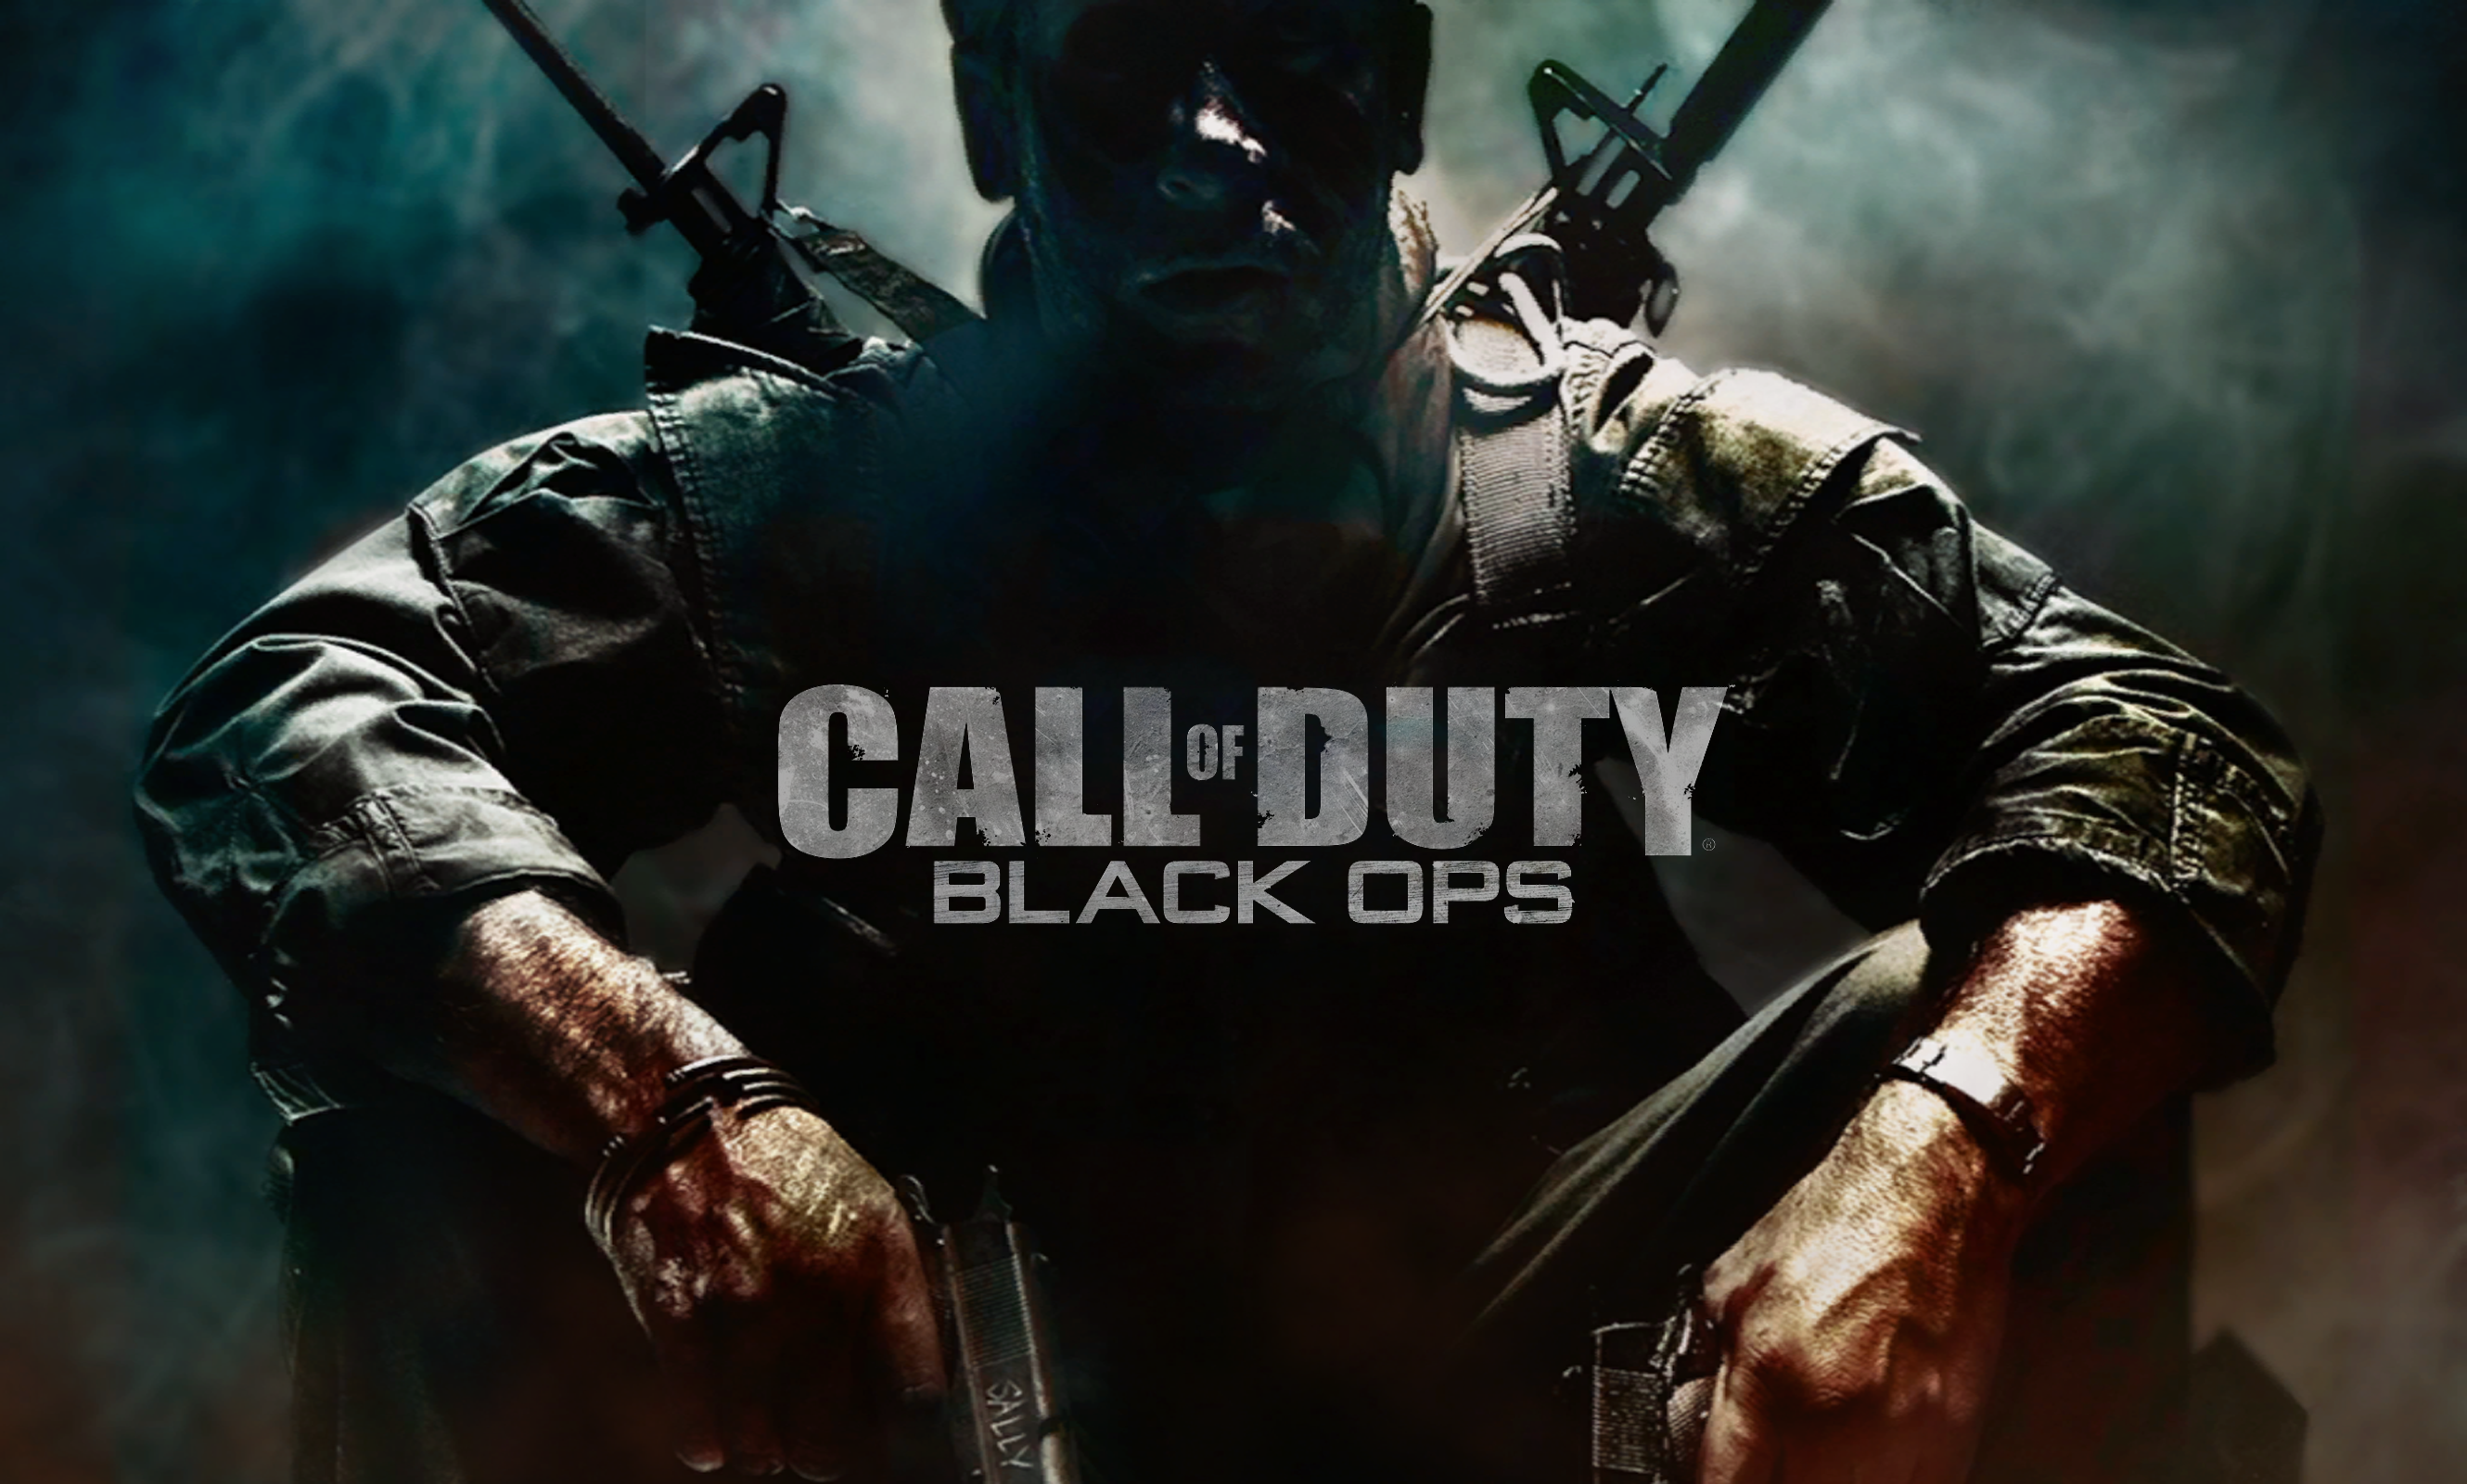 Free download cod black ops wallpaper 01 by ifoxx360 customization wallpaper other [2660x1600] for your Desktop, Mobile & Tablet. Explore Black Ops 1 Wallpaper. Cod Black Ops Wallpaper, Black